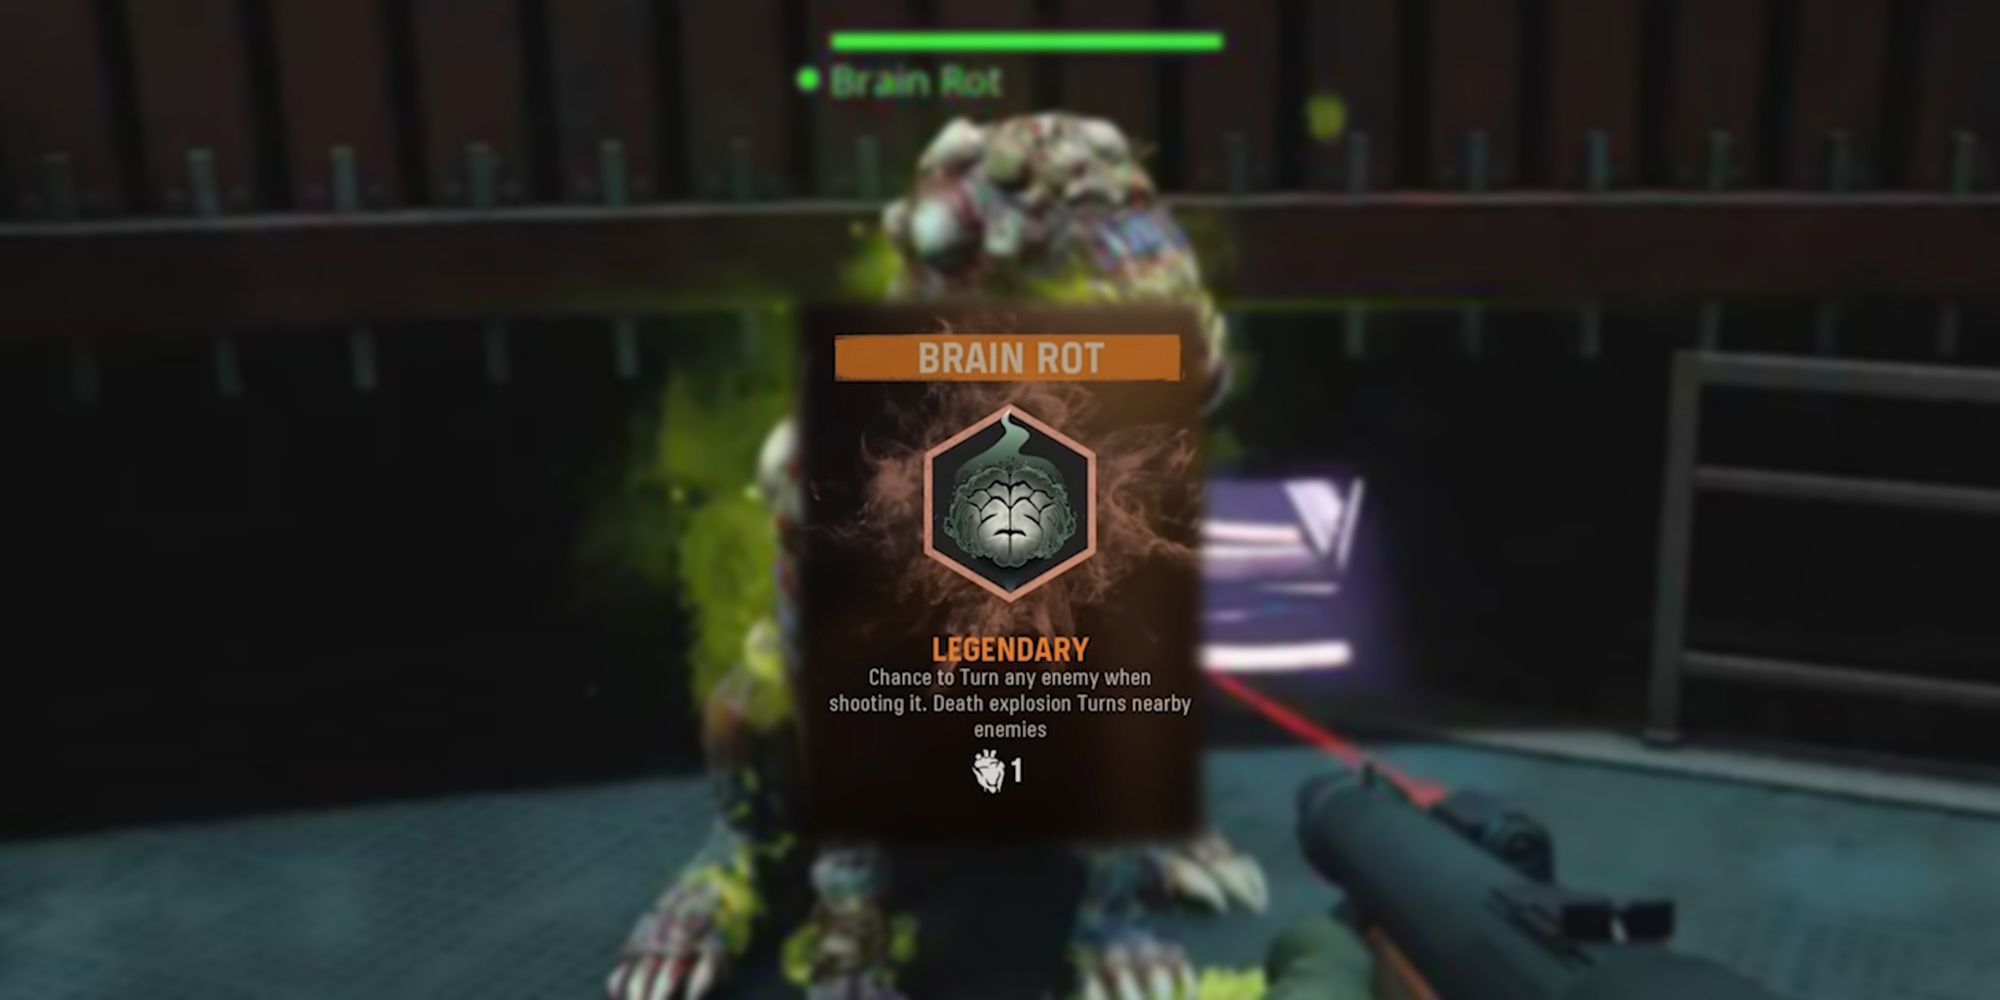 Call of Duty Vanguard Zombies - Brain Rot Description In-Game Overlaid On Image Of Plaguehound with Brain Rot From Cold War Zombies